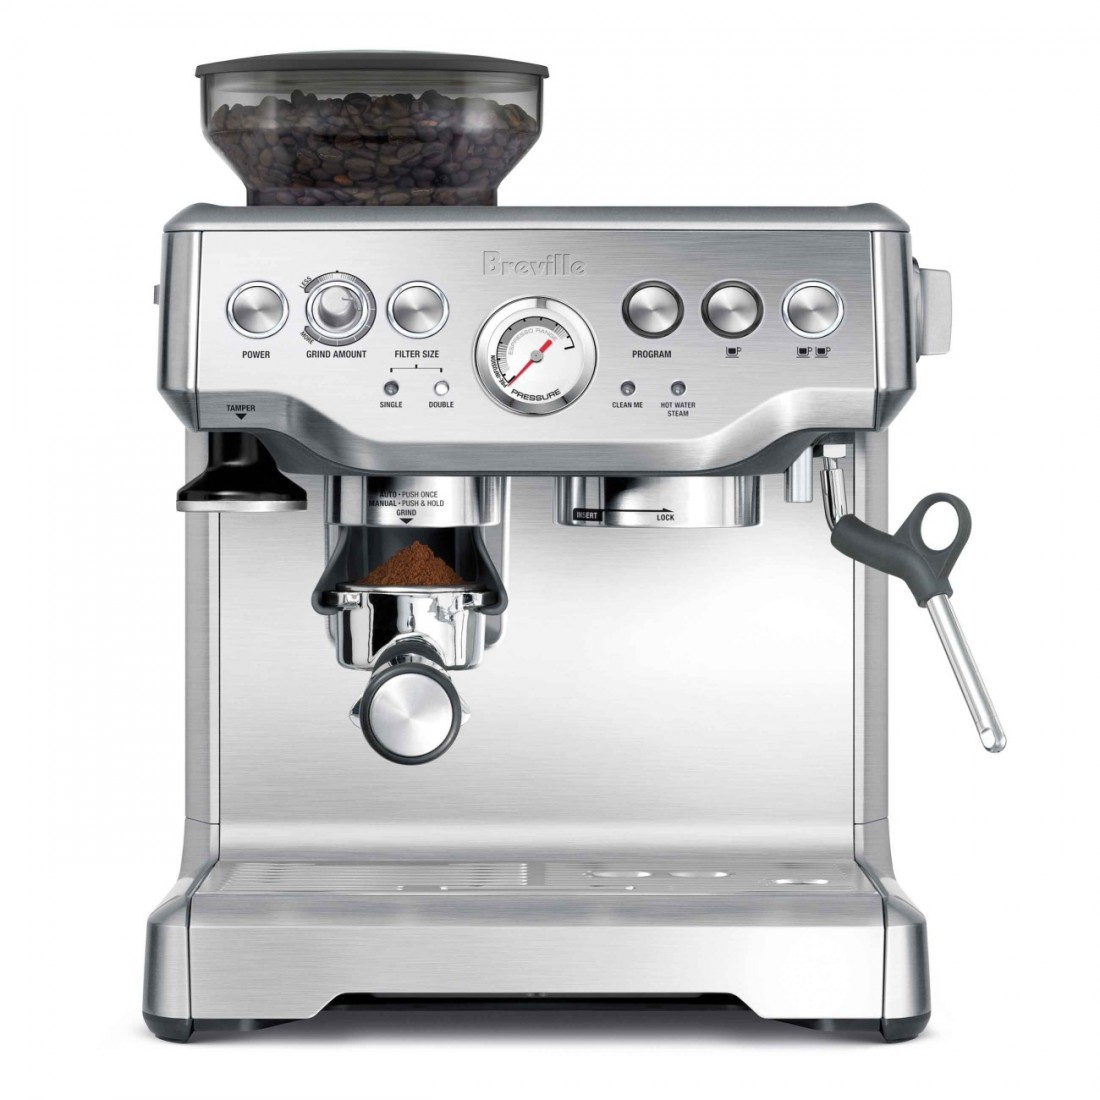 Get third-wave specialty coffee straight from your kitchen countertop with Breville’s The Barista Express